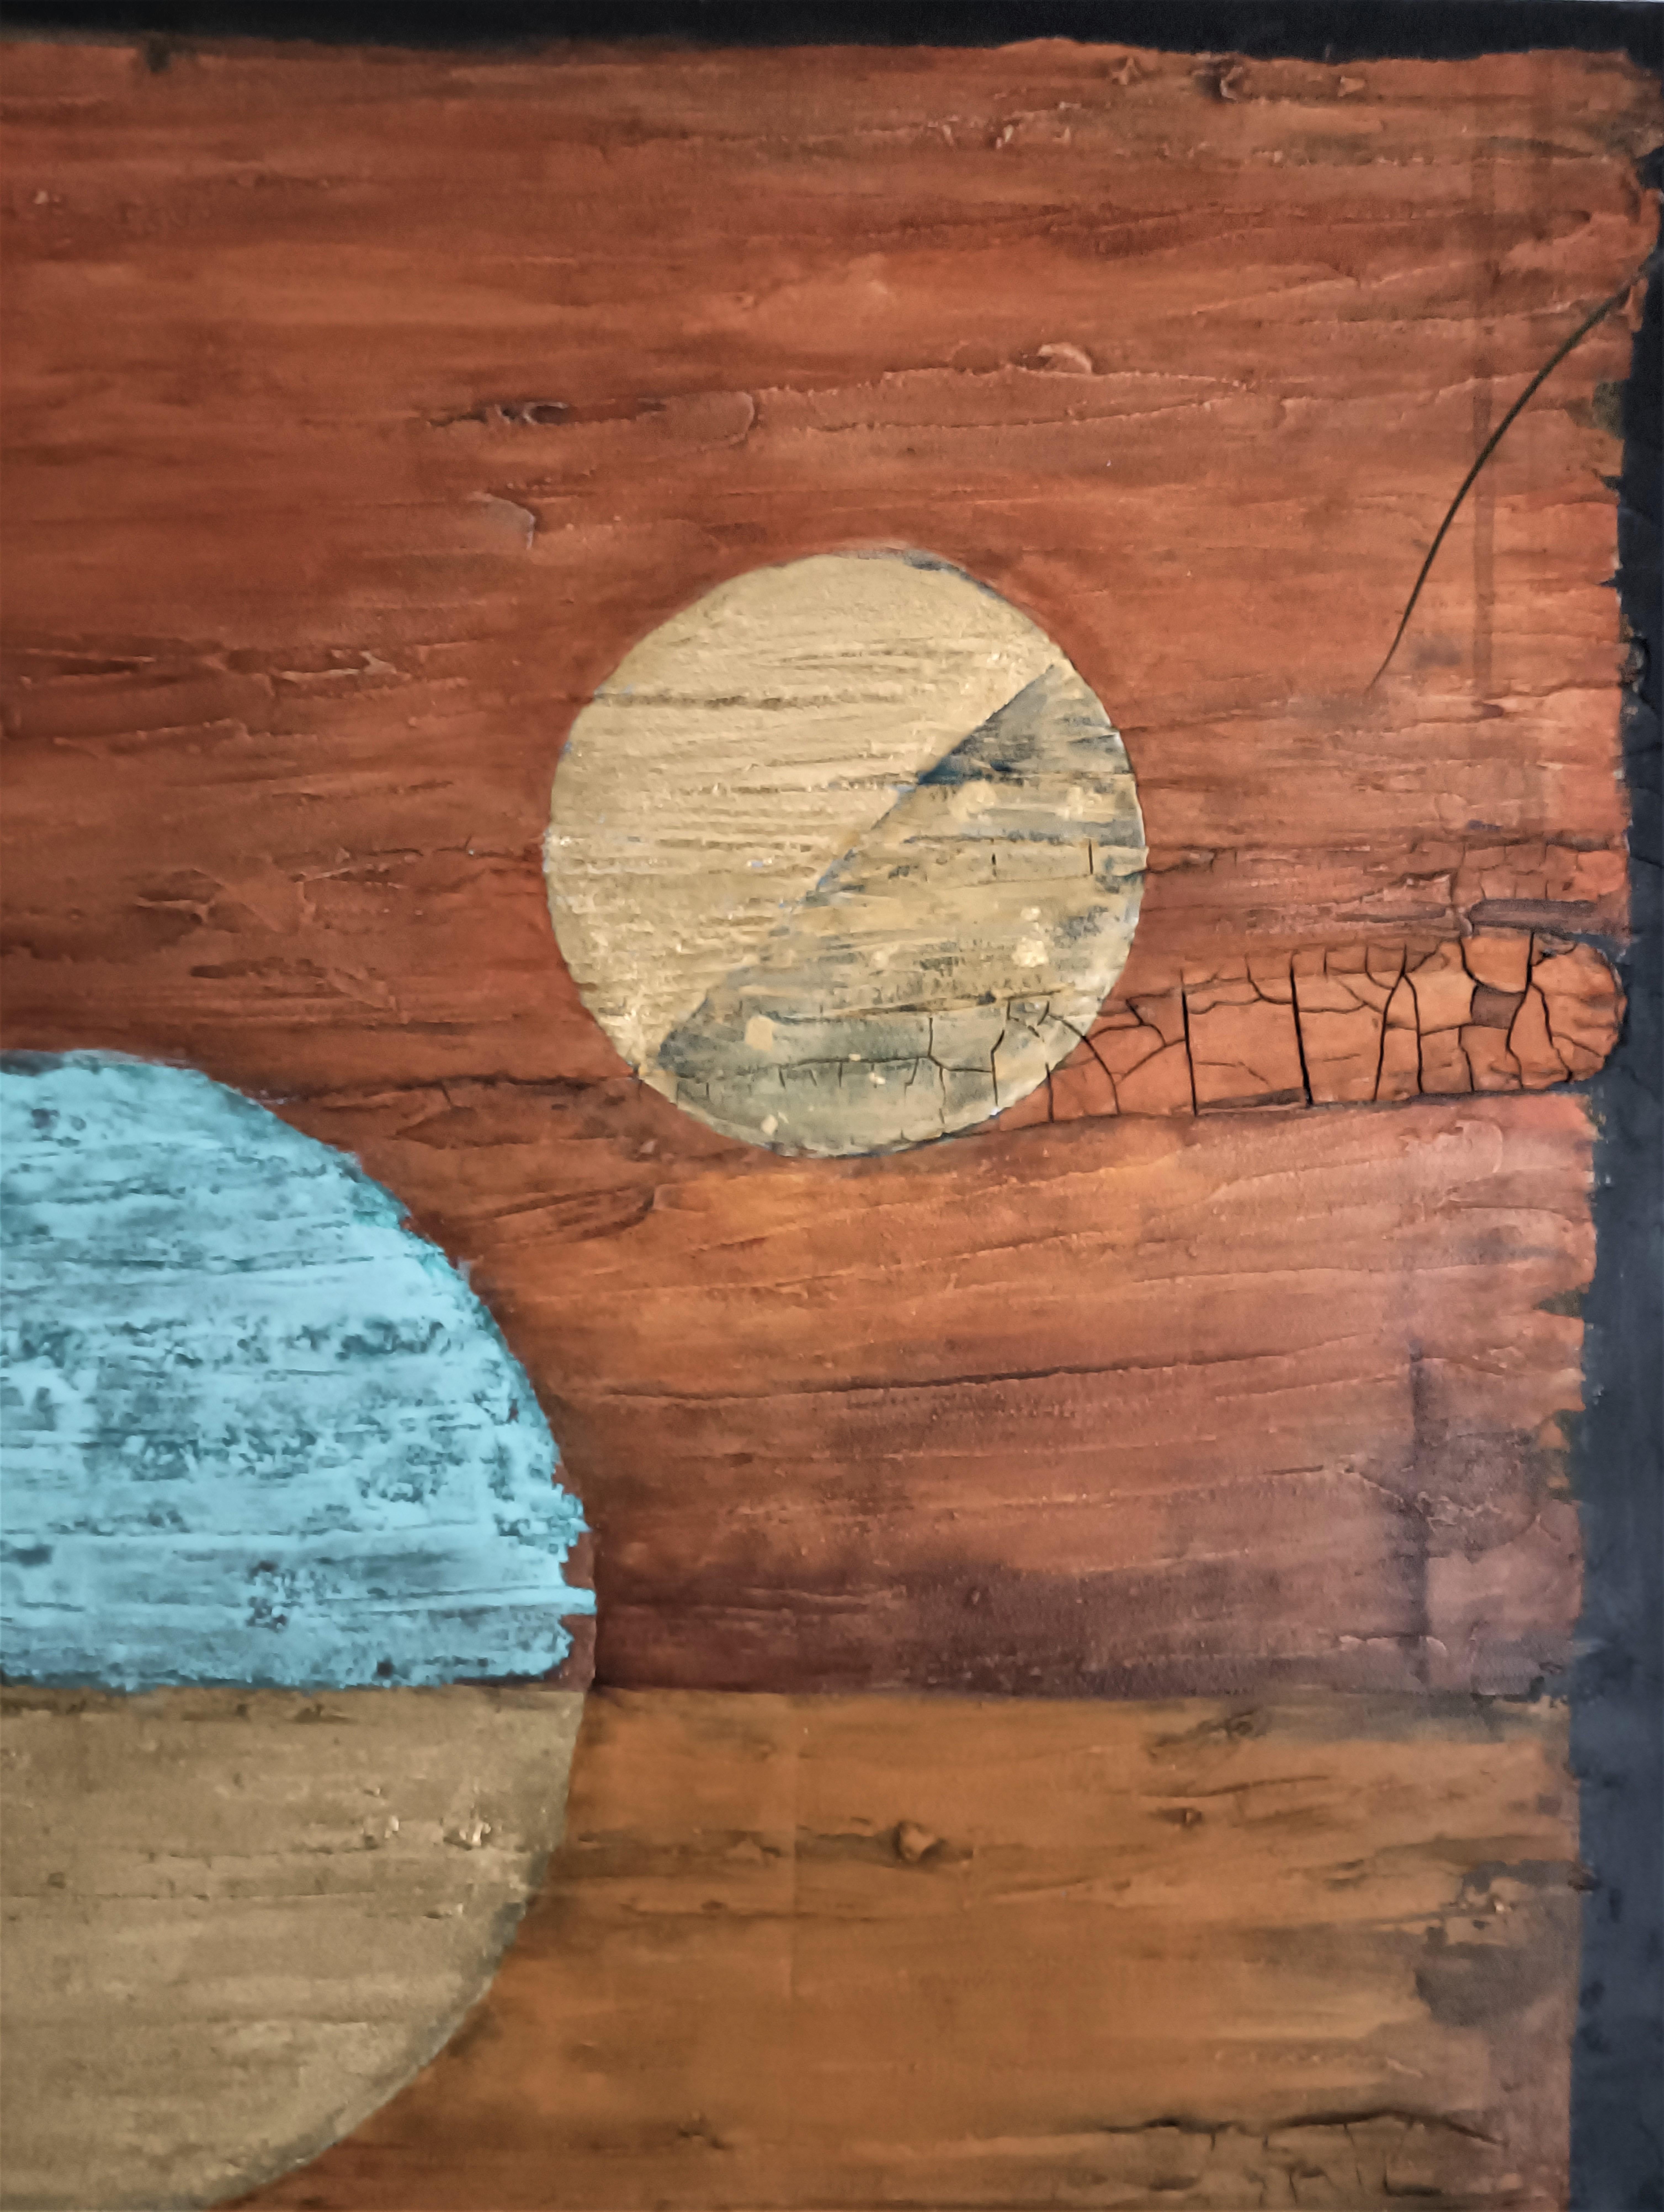 Solar activity impacts our entire world and when the sun experiences turbulence so do we. Sunspots offers Shelly's very personal view of the sun's mood.

Acrylic on box canvas with gold leaf and oxidised copper paint

